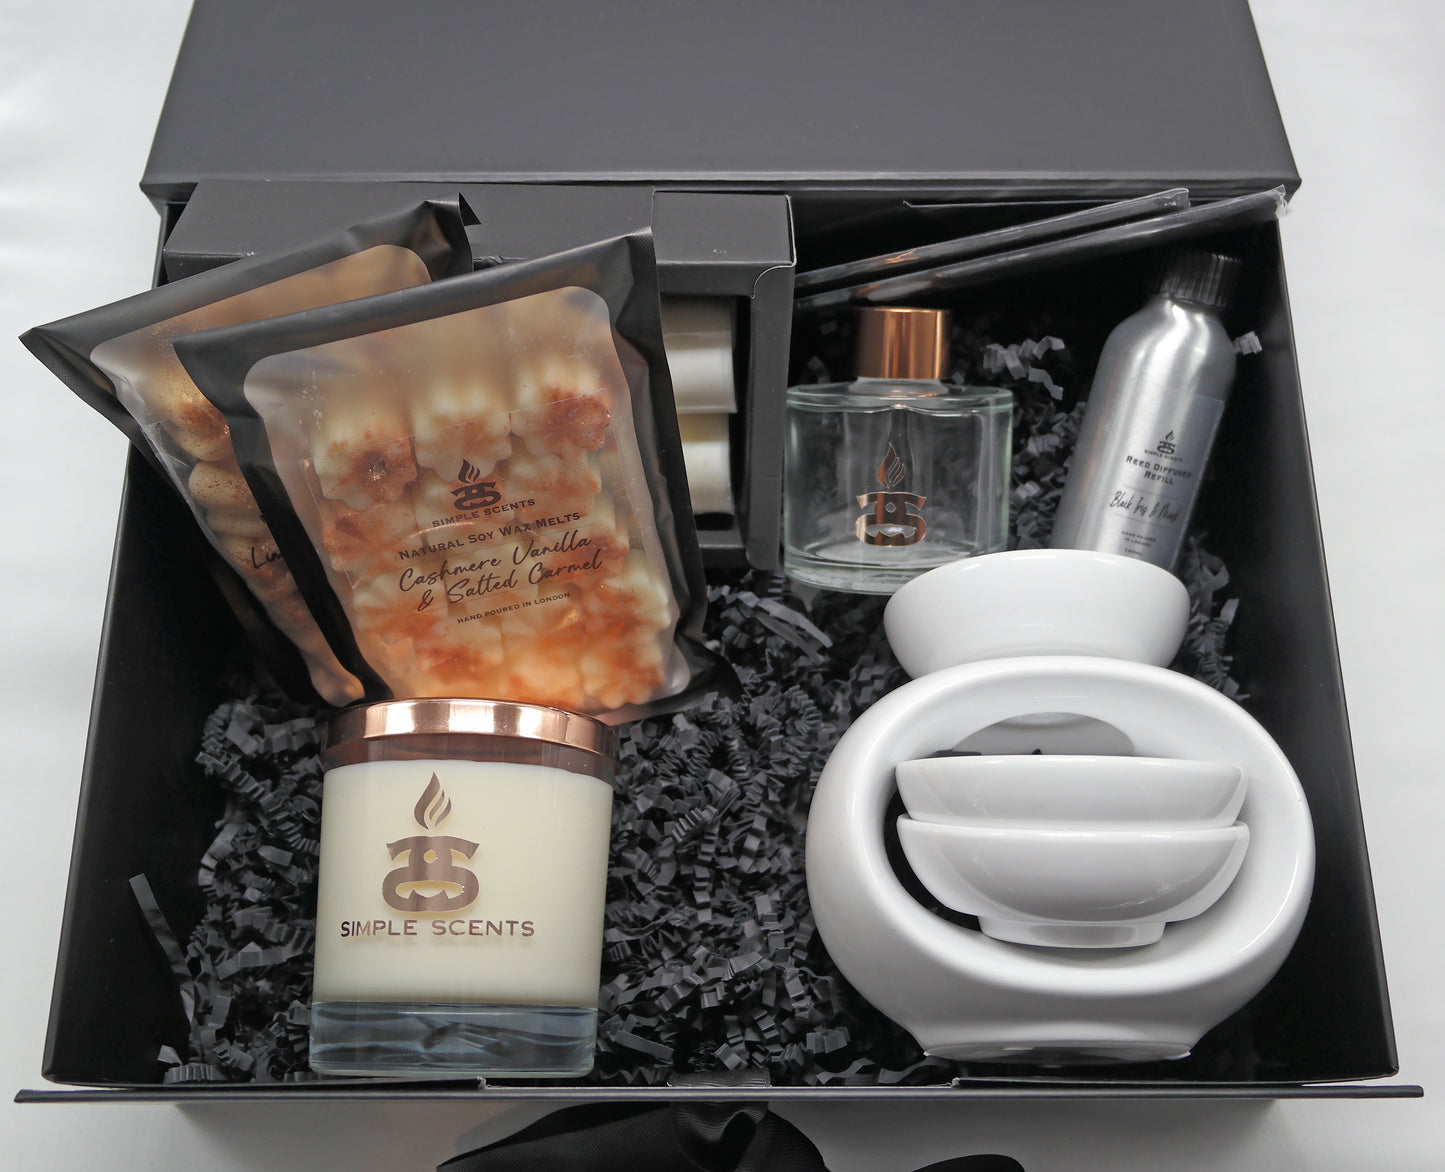 Simple Scents Experience Candle, Wax Melt, Rome Trio Burner, Reed Diffuser & Diffuser Refill Gift Set